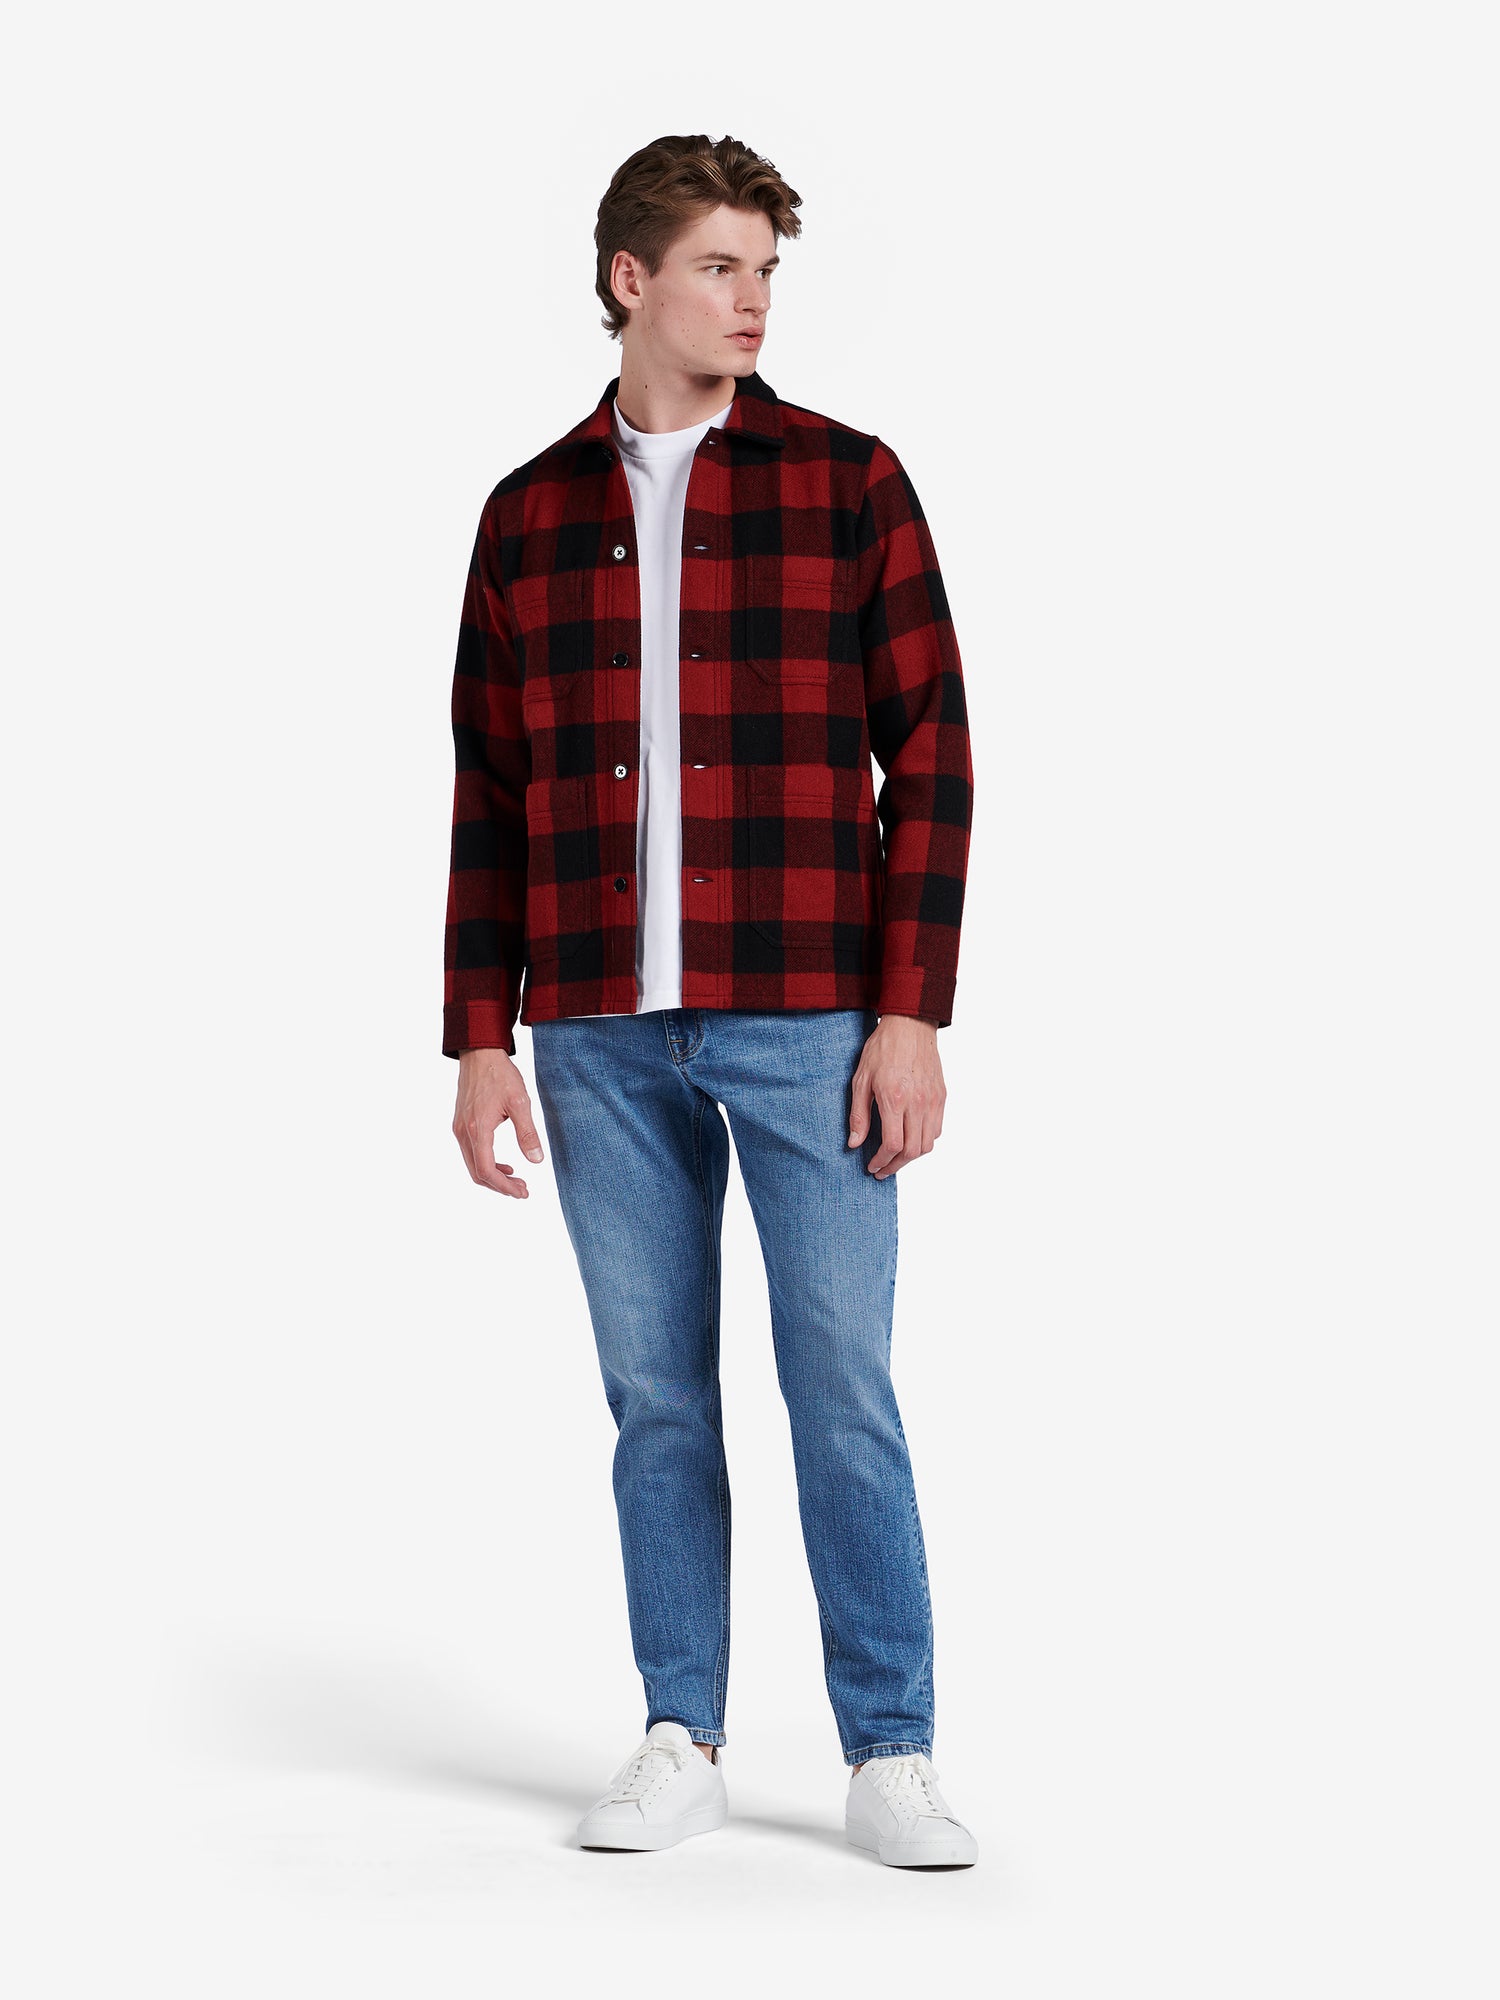 Philly Checked Wool OW00043-RED